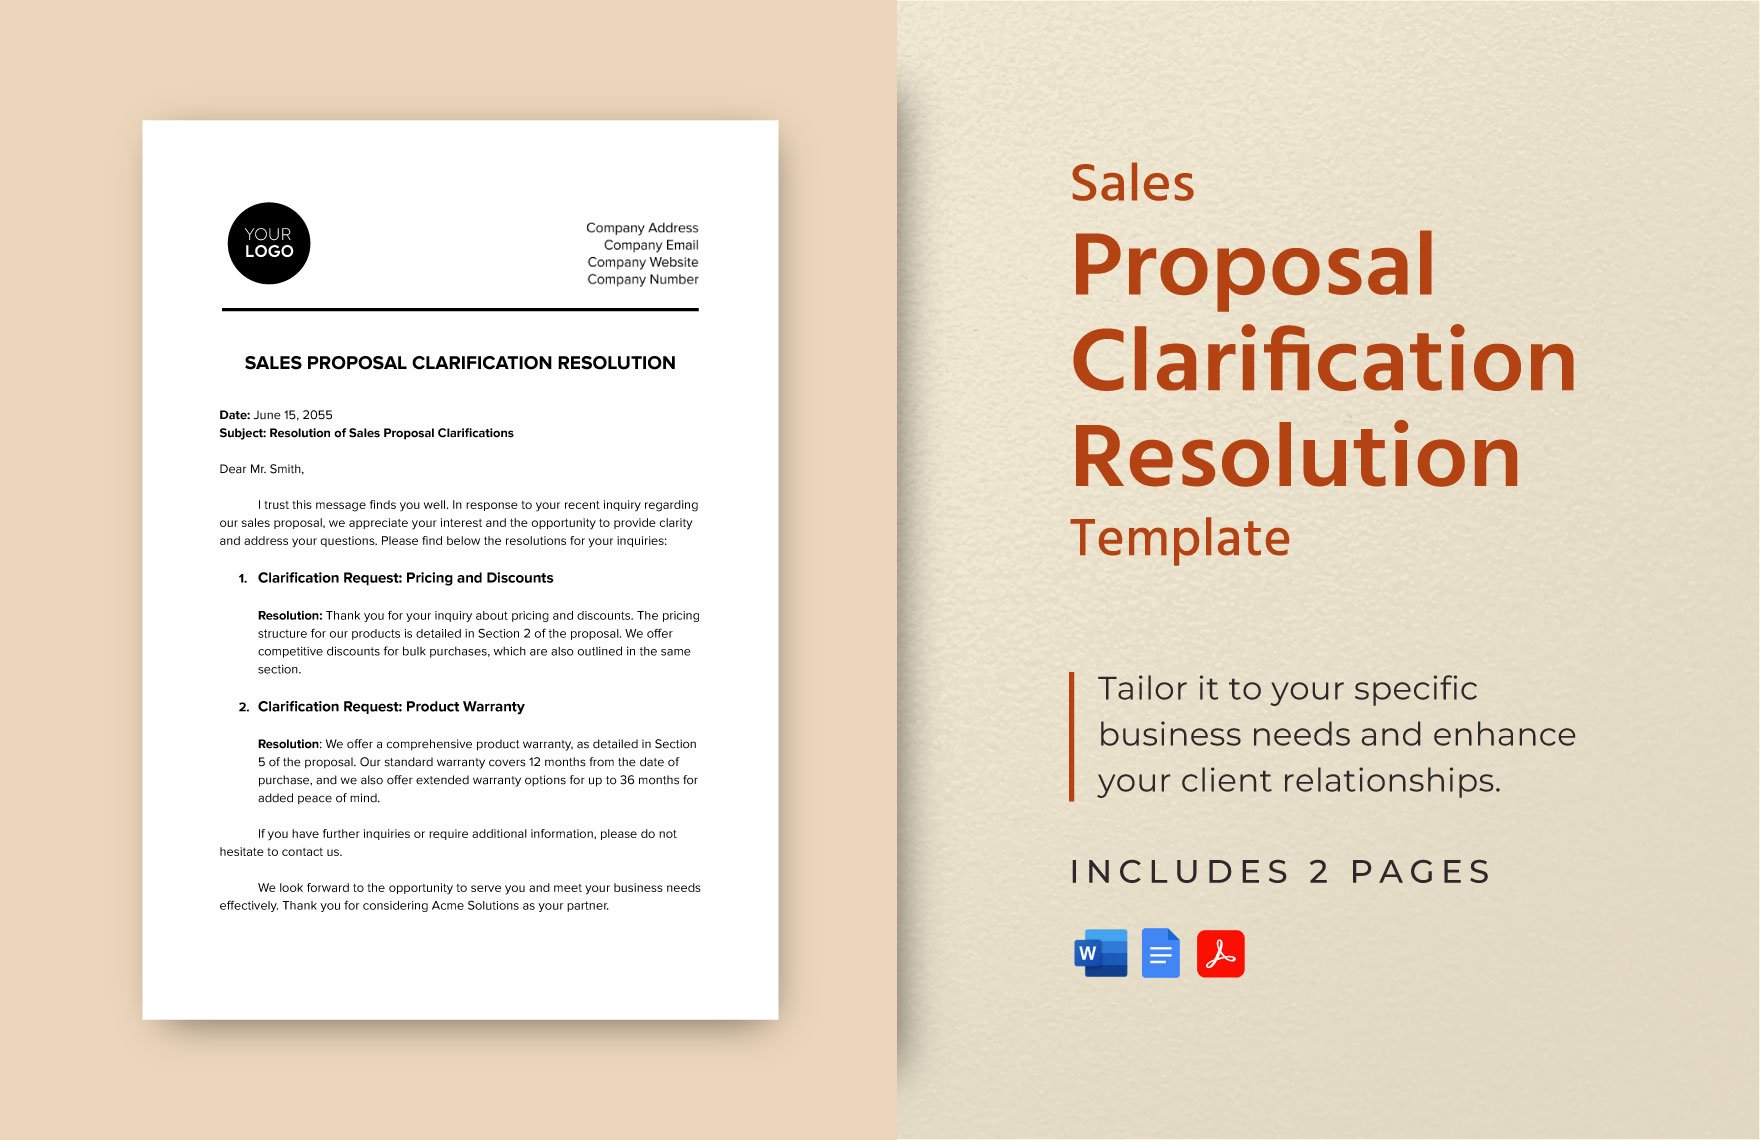 Sales Proposal Clarification Resolution Template